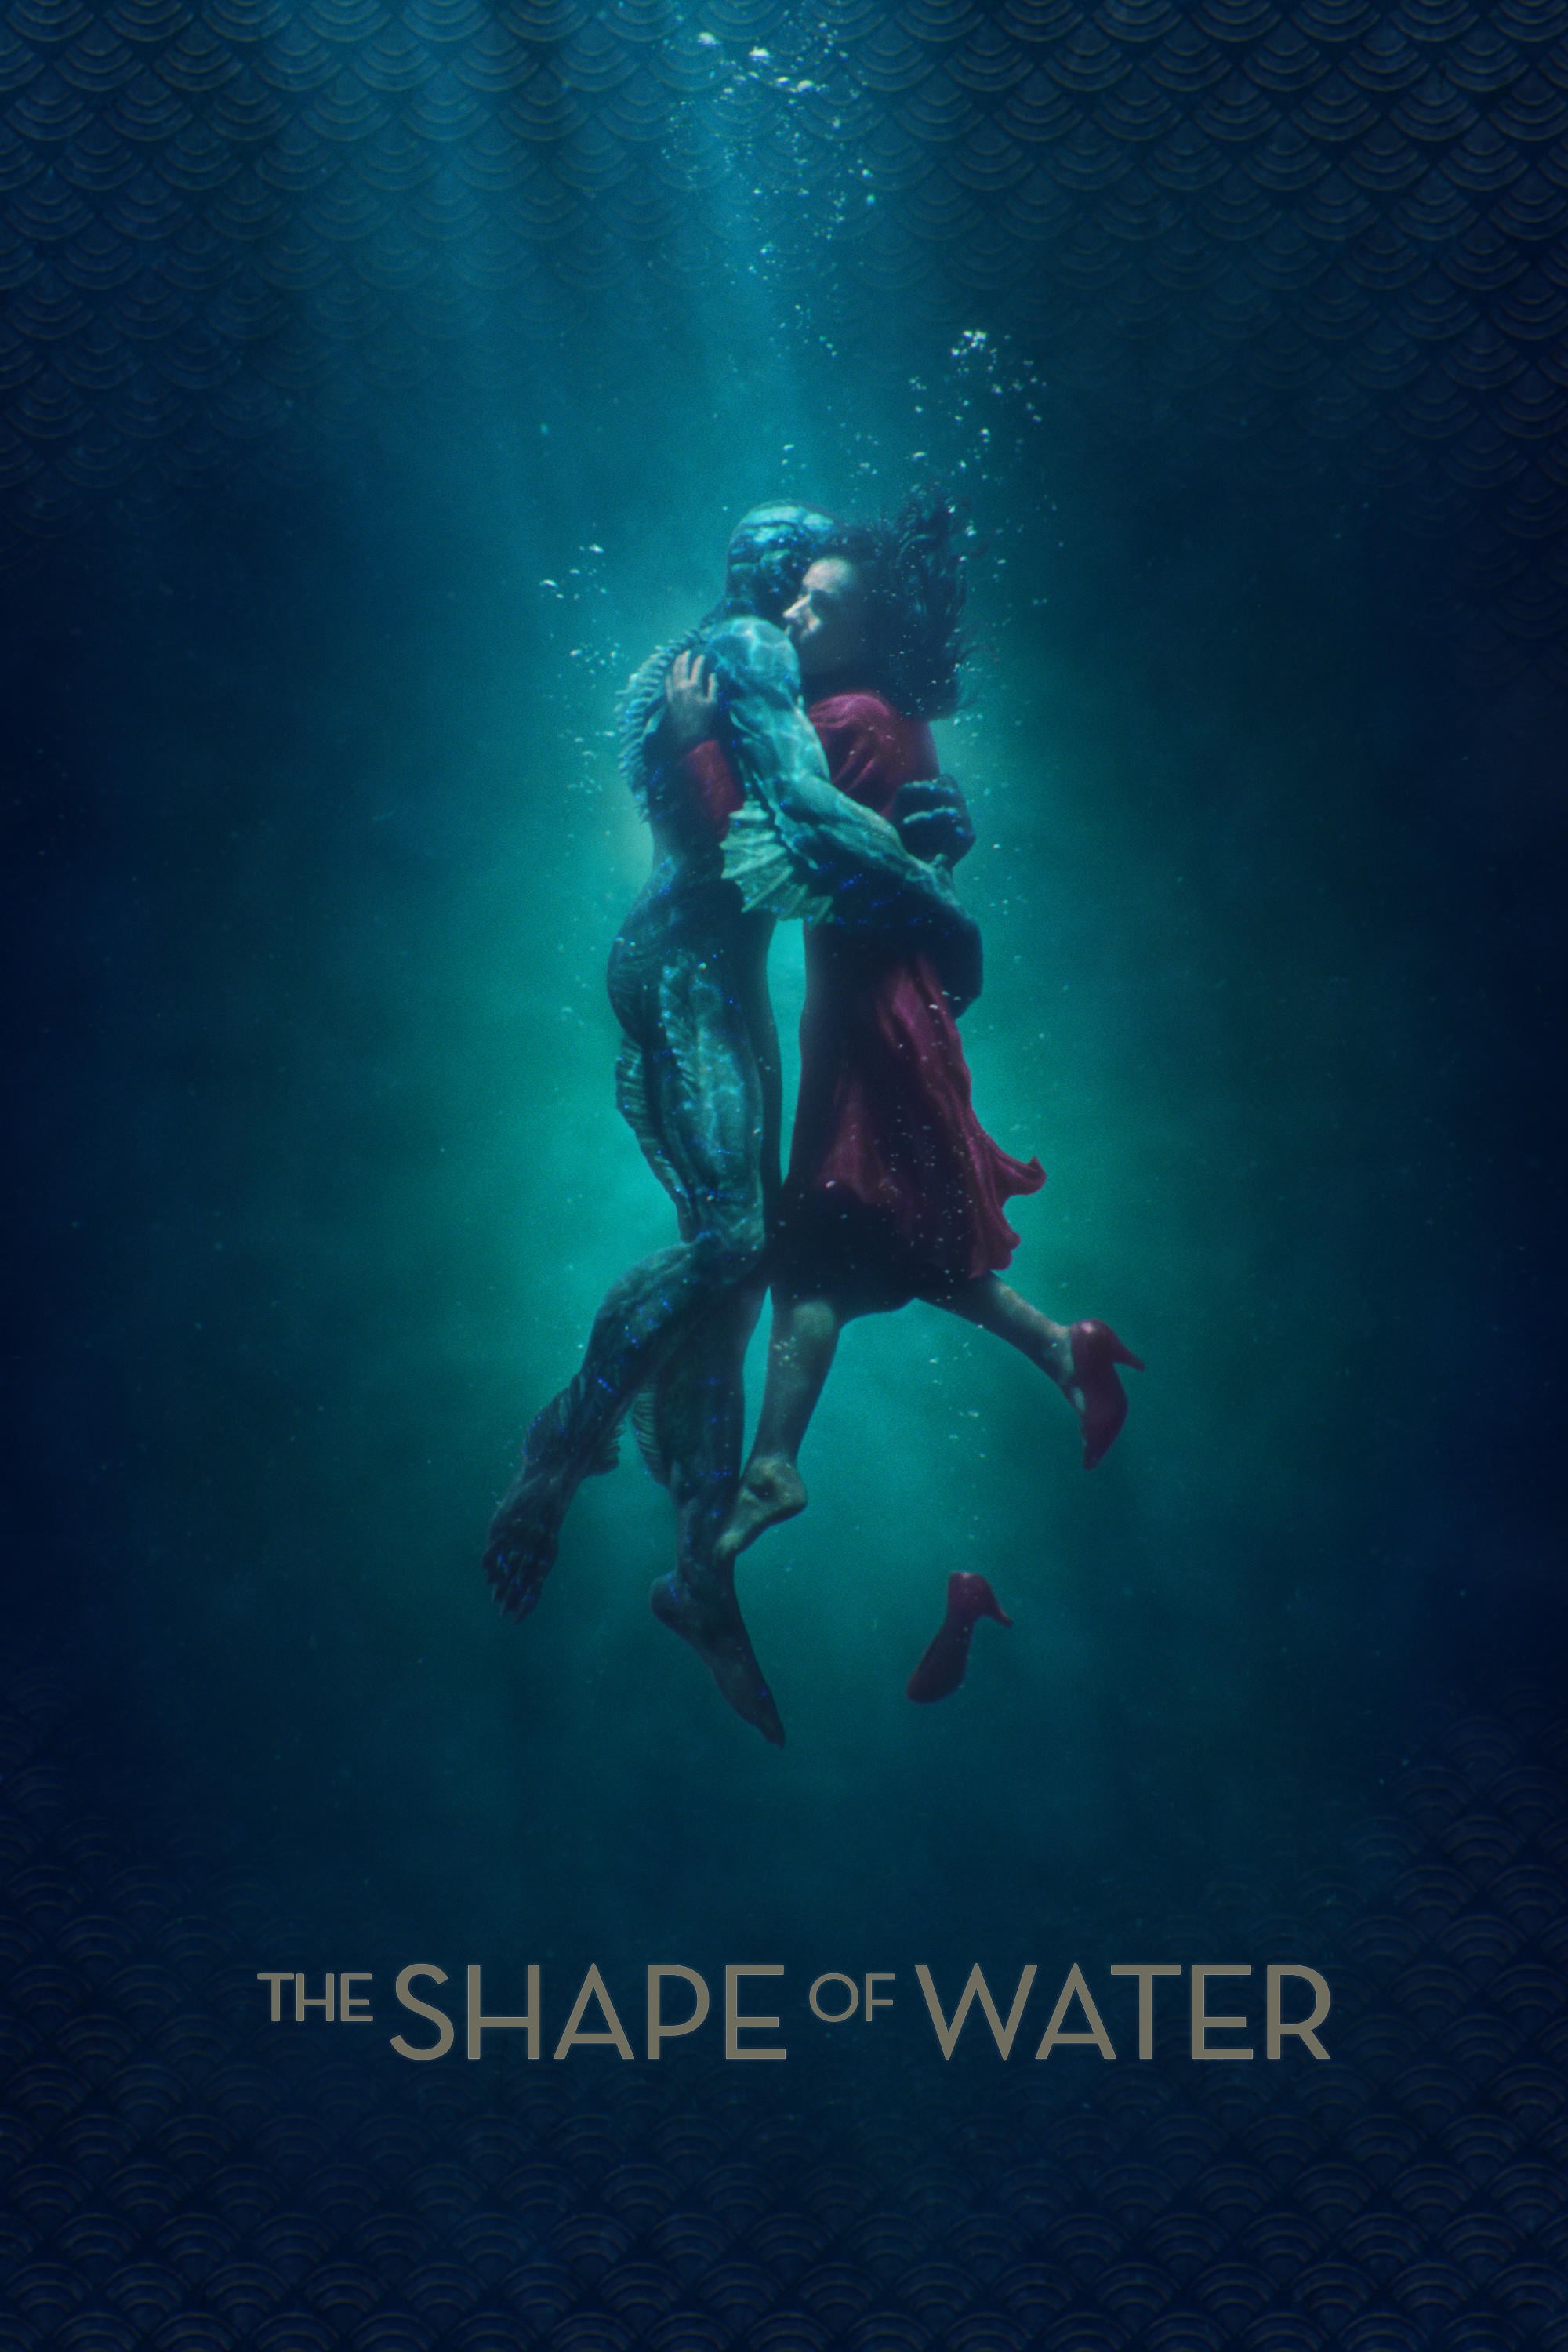 Poster for the movie "The Shape of Water"